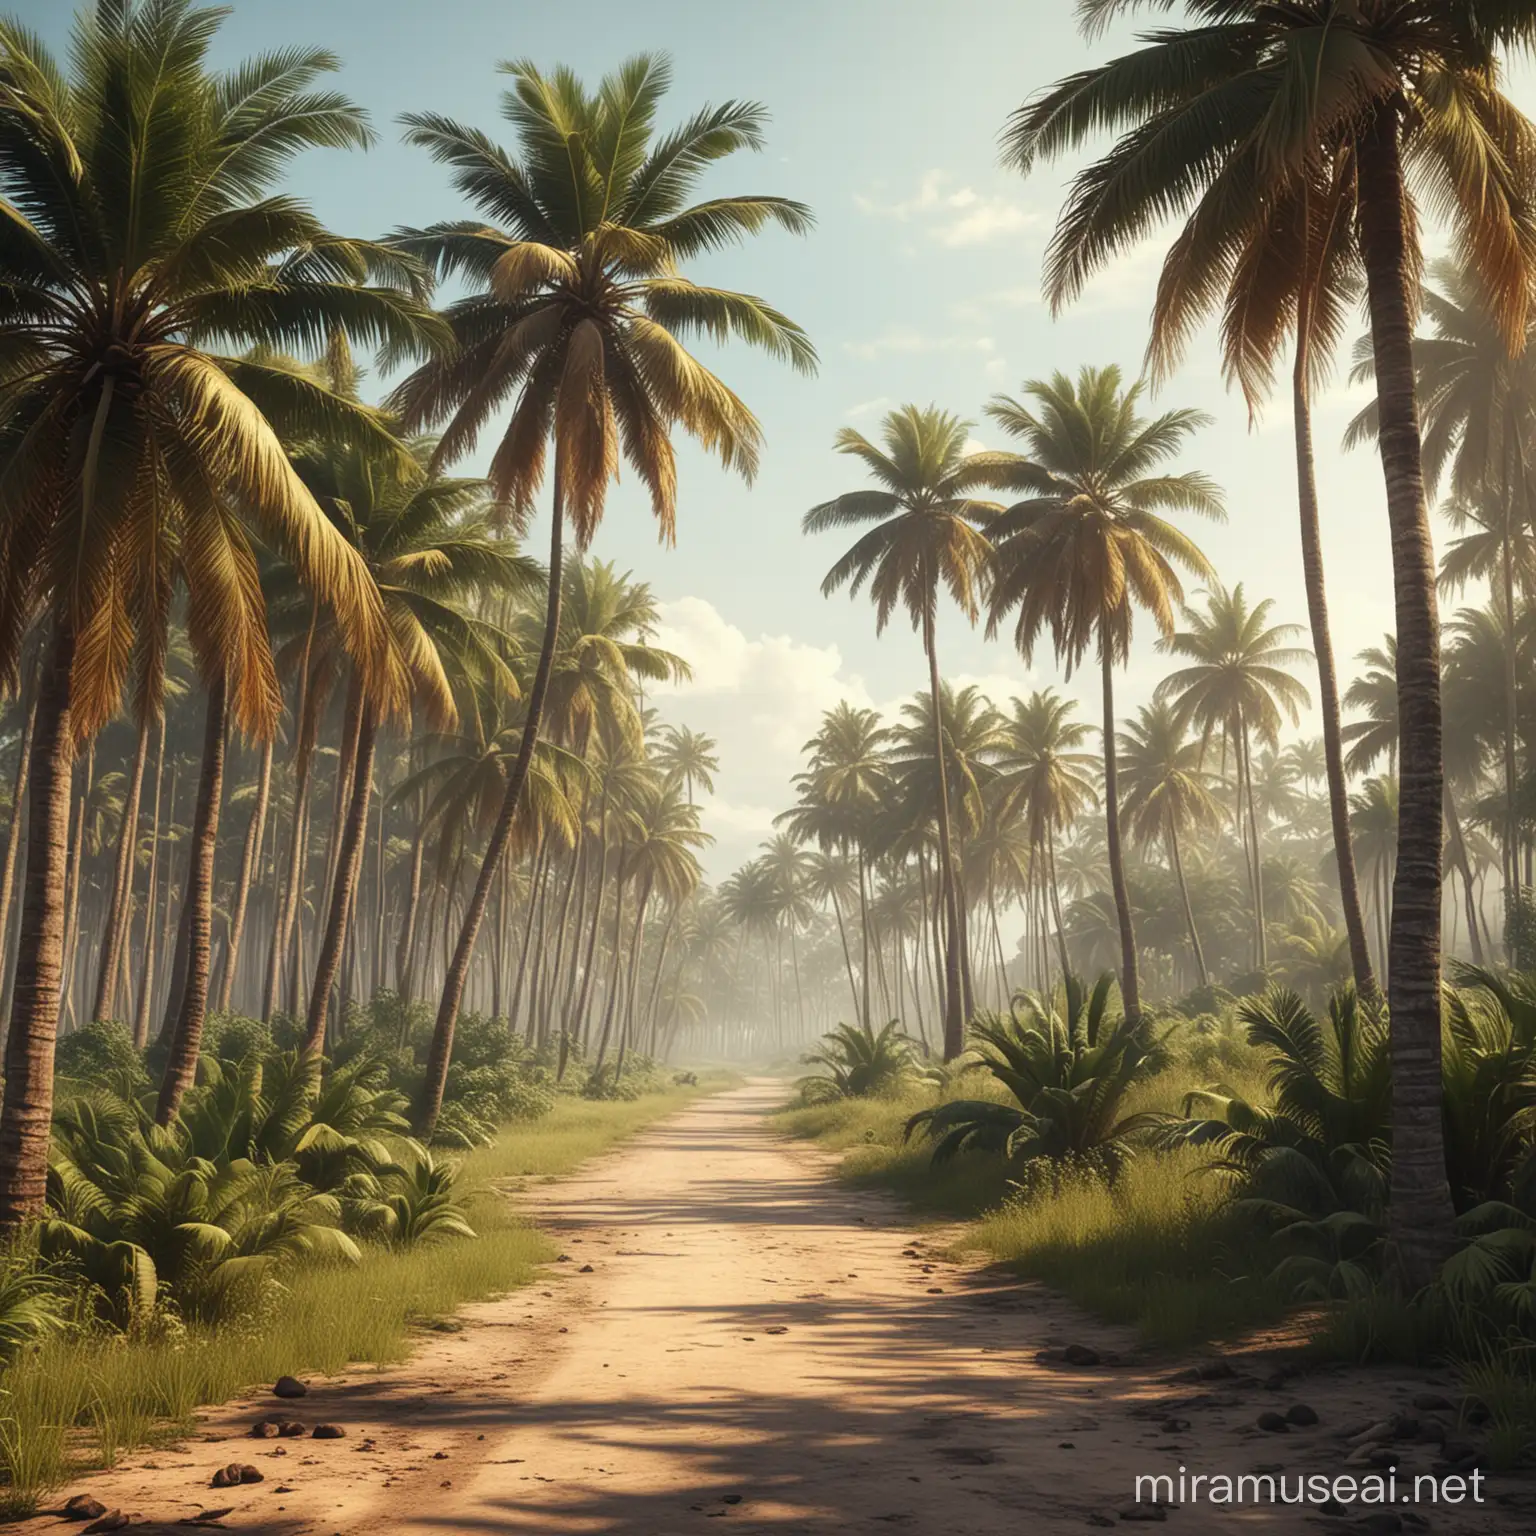 Tropical Palm Trees Landscape in Rural India